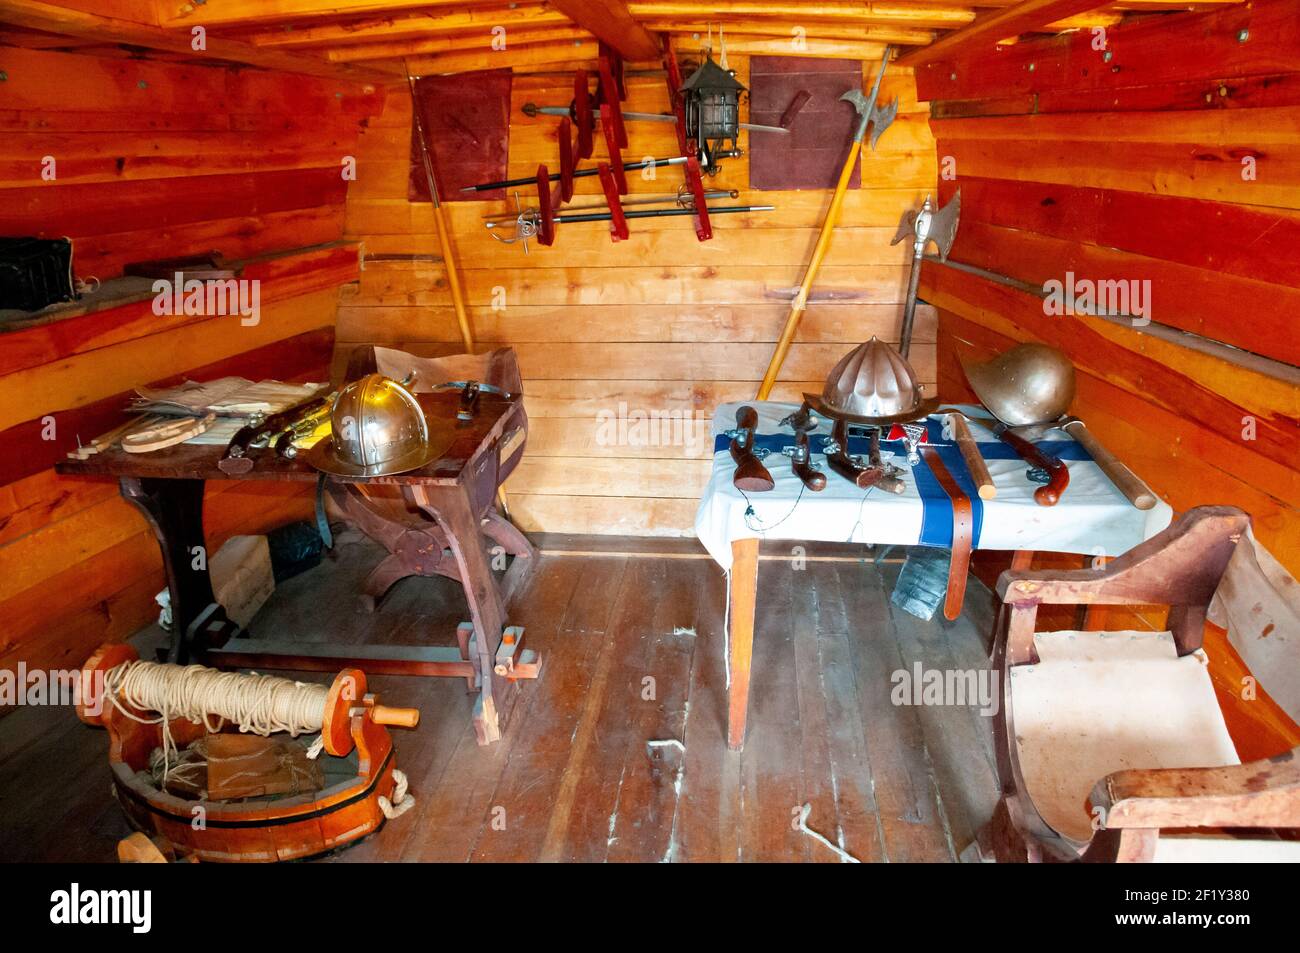 Cabin in Old Wooden Ship Stock Photo